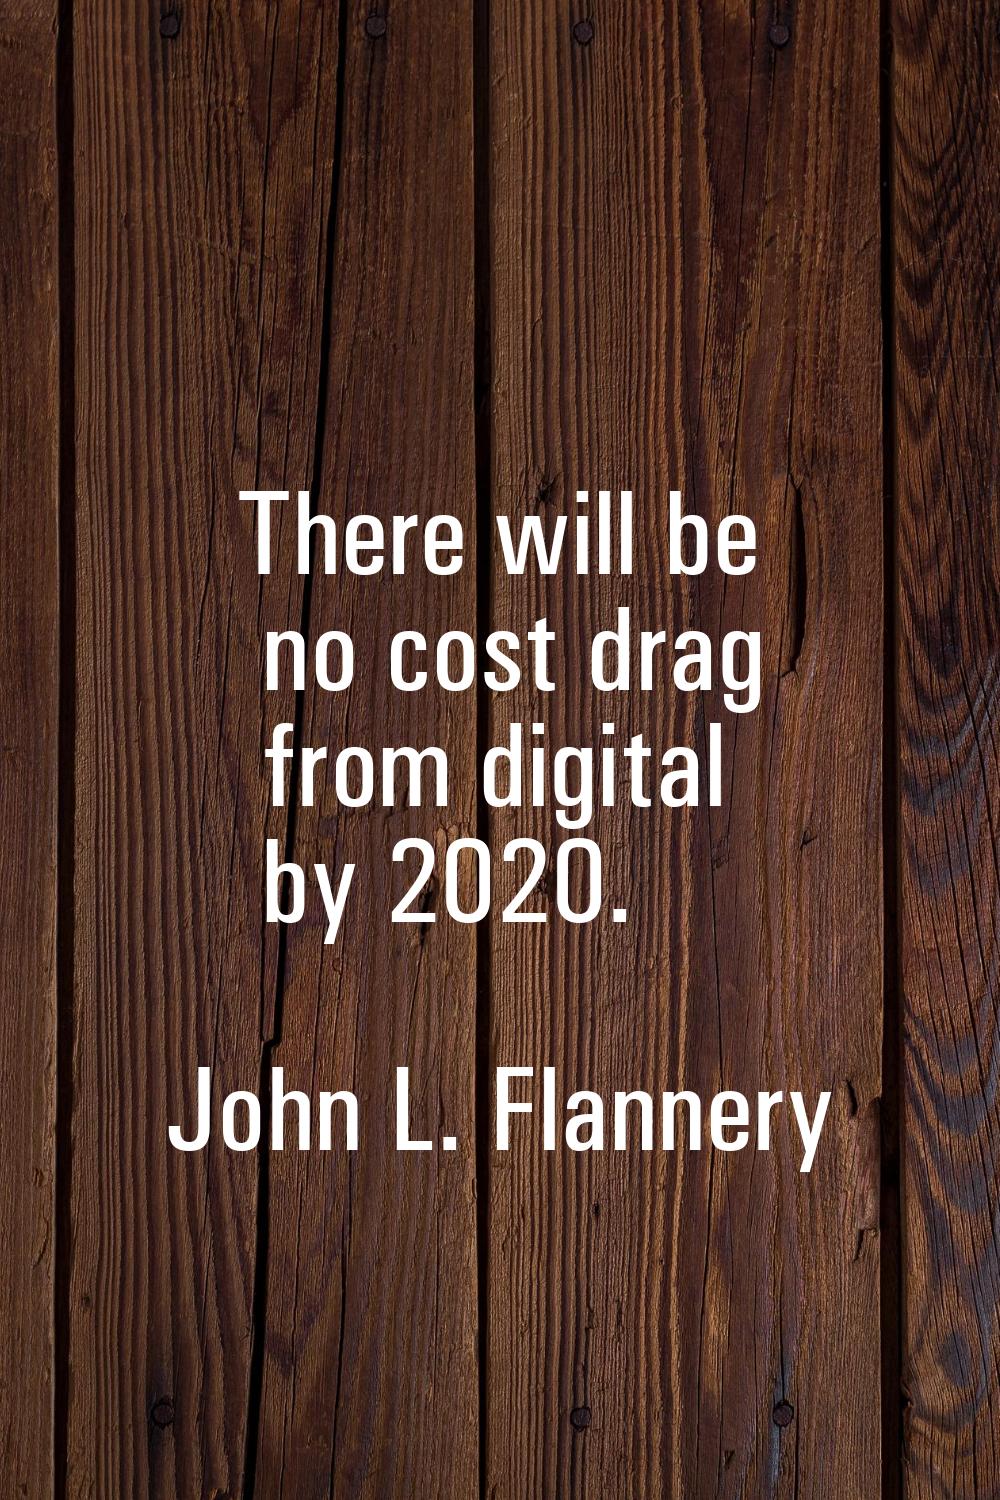 There will be no cost drag from digital by 2020.